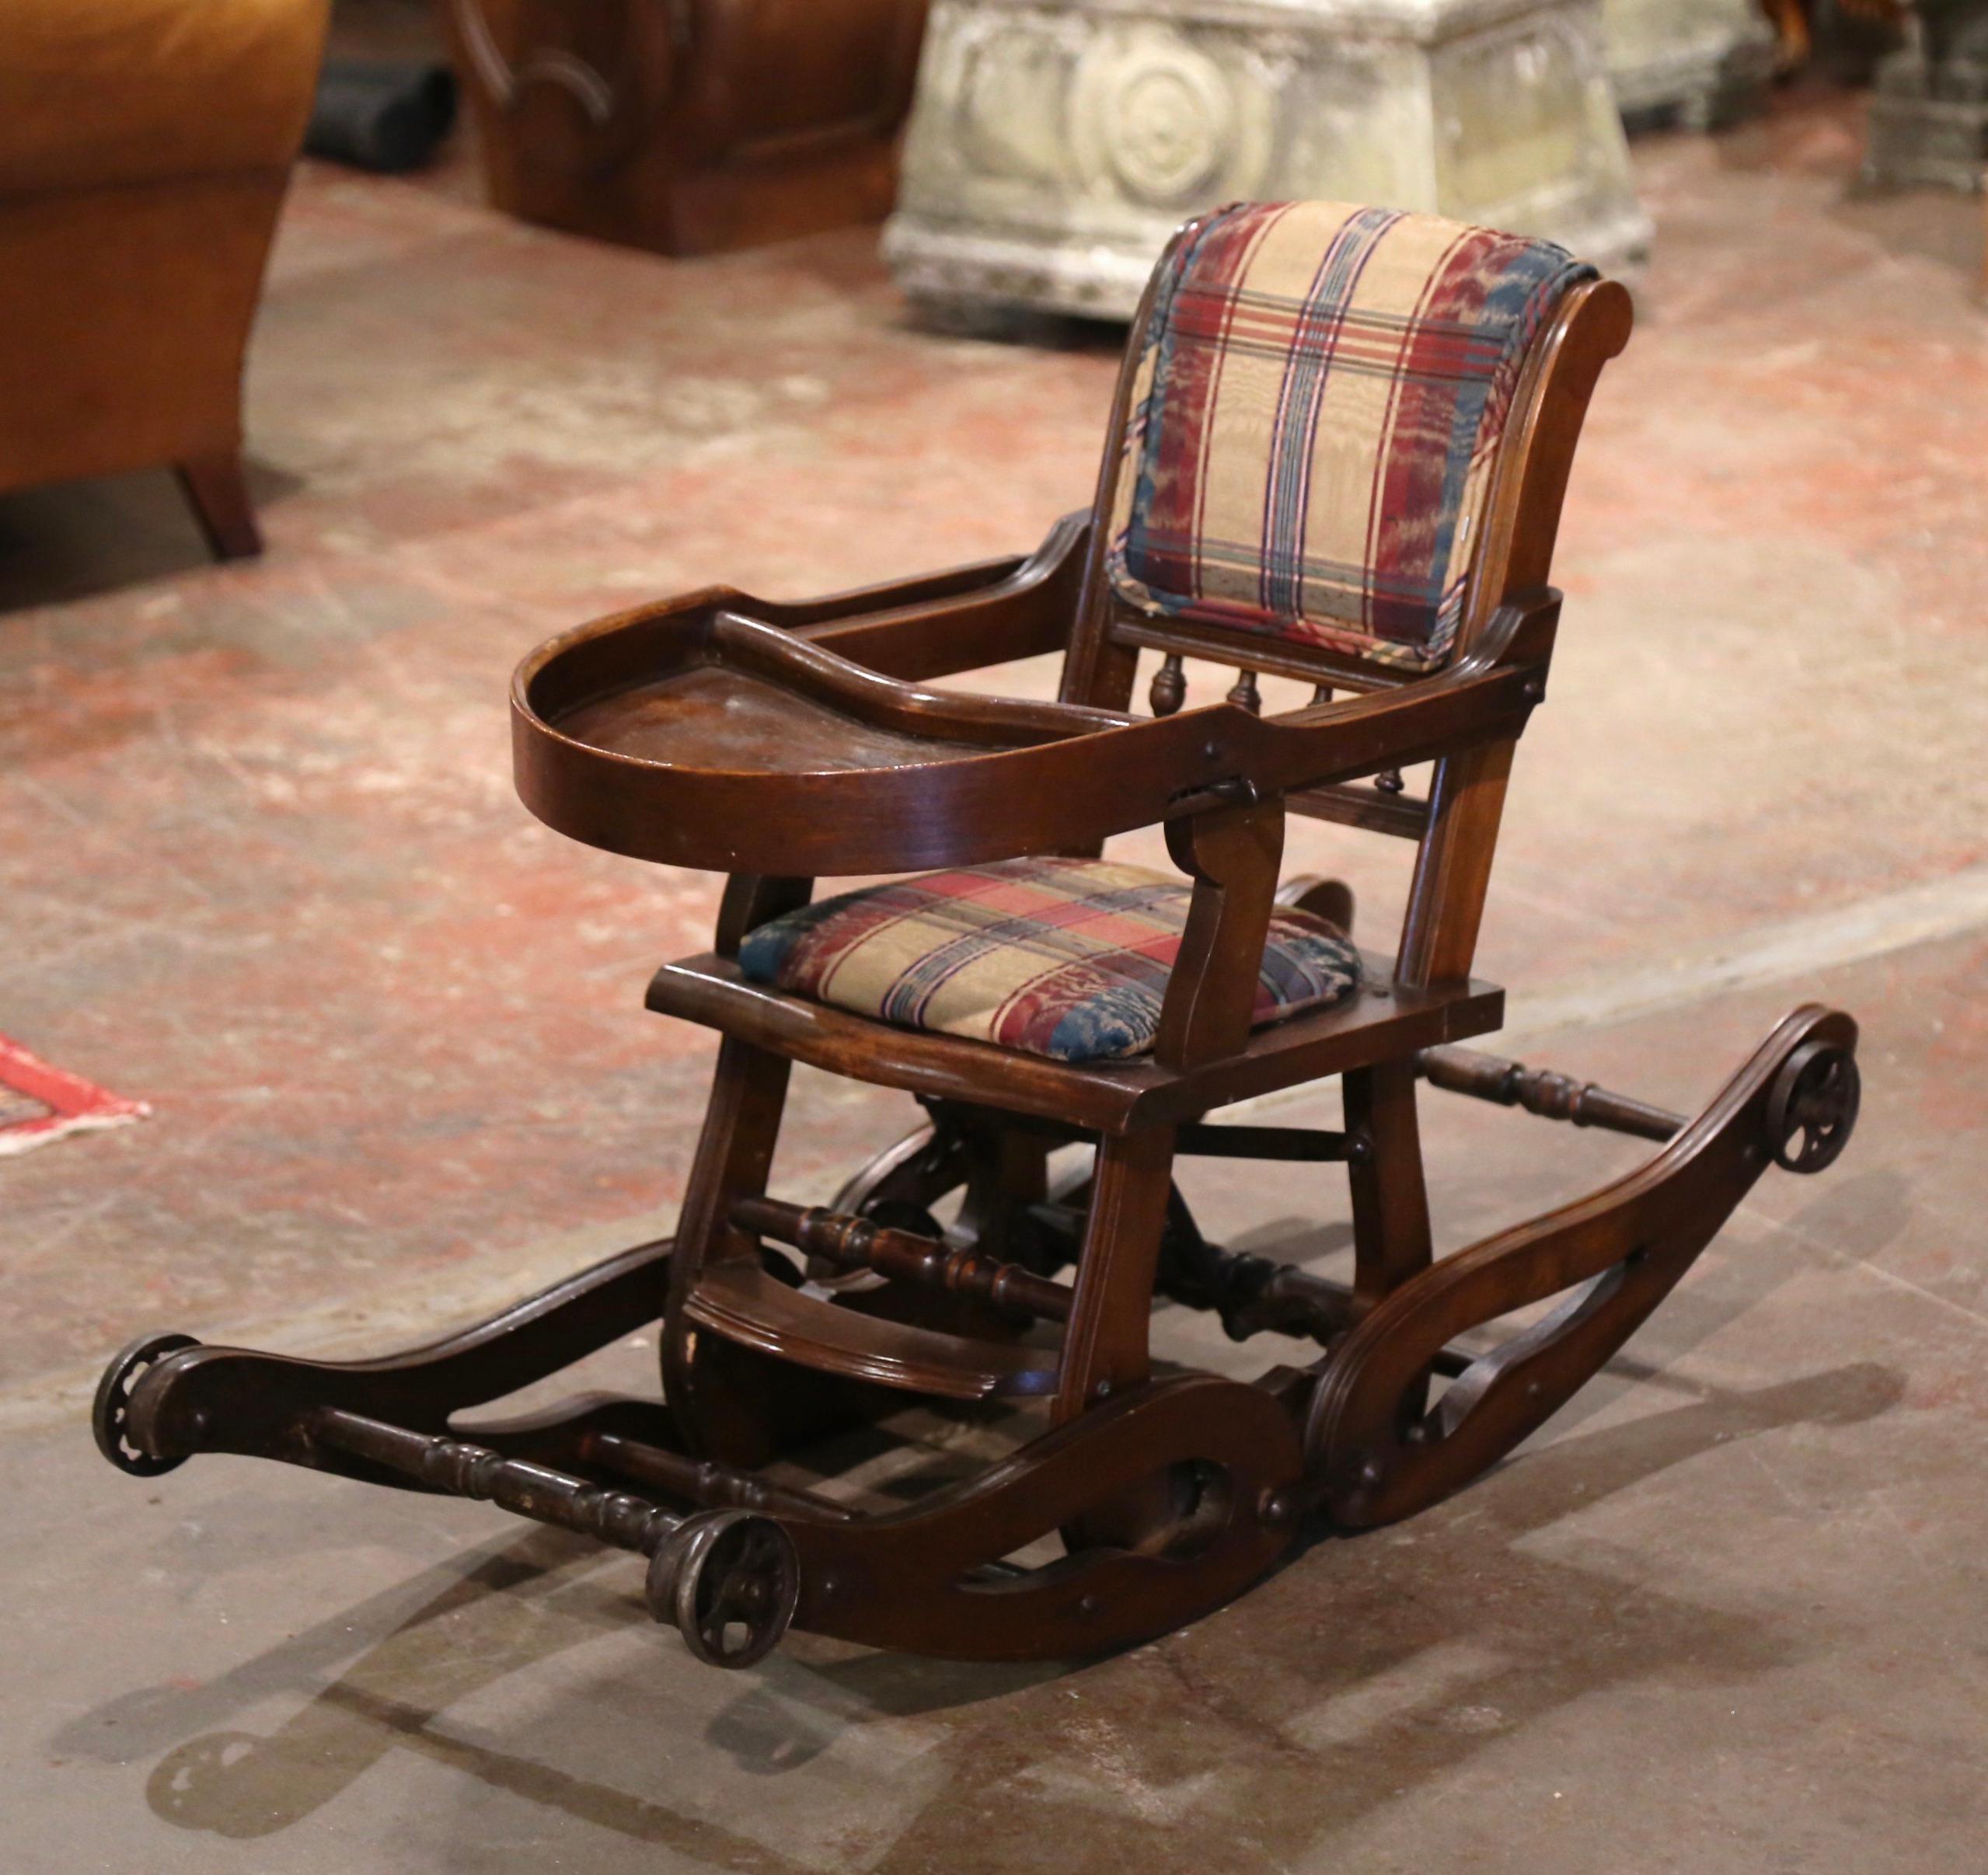 Feed your child in style or let him/her play in the antique and ingenious Victorian high chair! Crafted in England circa 1880 and made of walnut wood and upholstered with plaid fabric, the charming baby chair has a double function; to feed a child